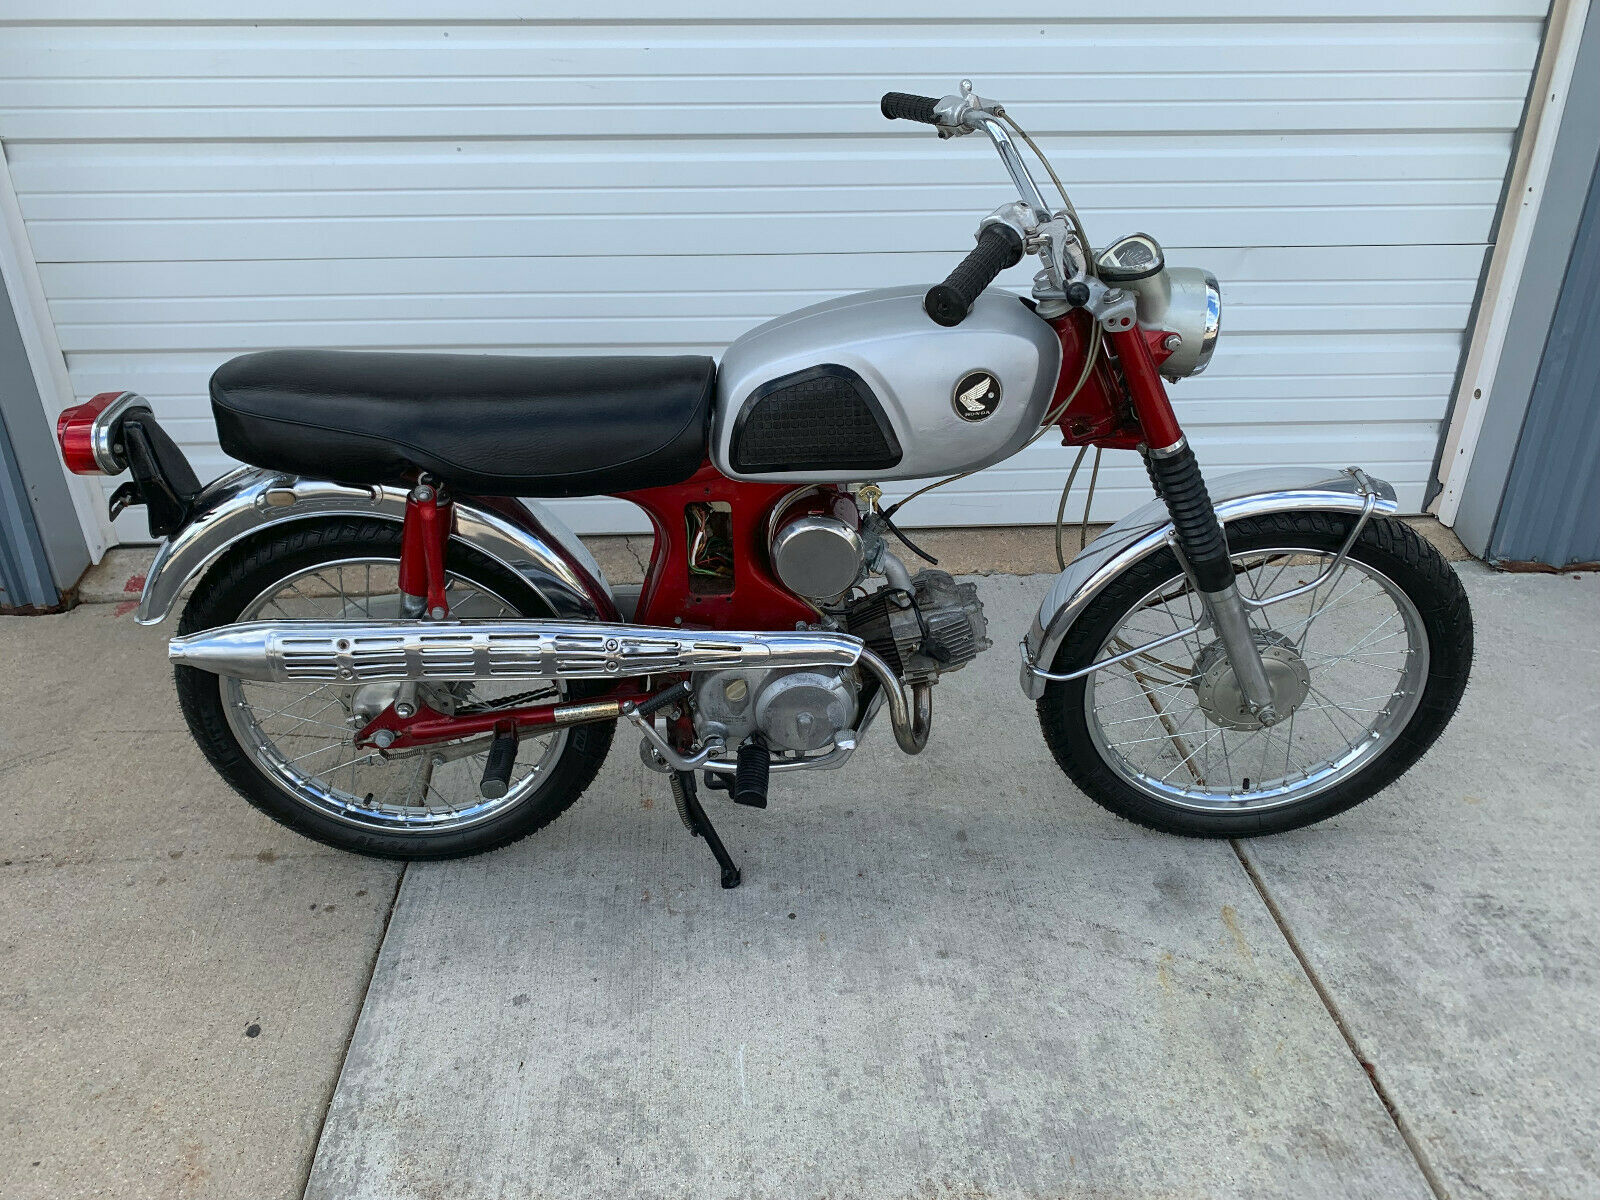 1967 Honda Cl  1967 Honda Cl90 Motorcycle  Red & Silver  Only 2091 Miles